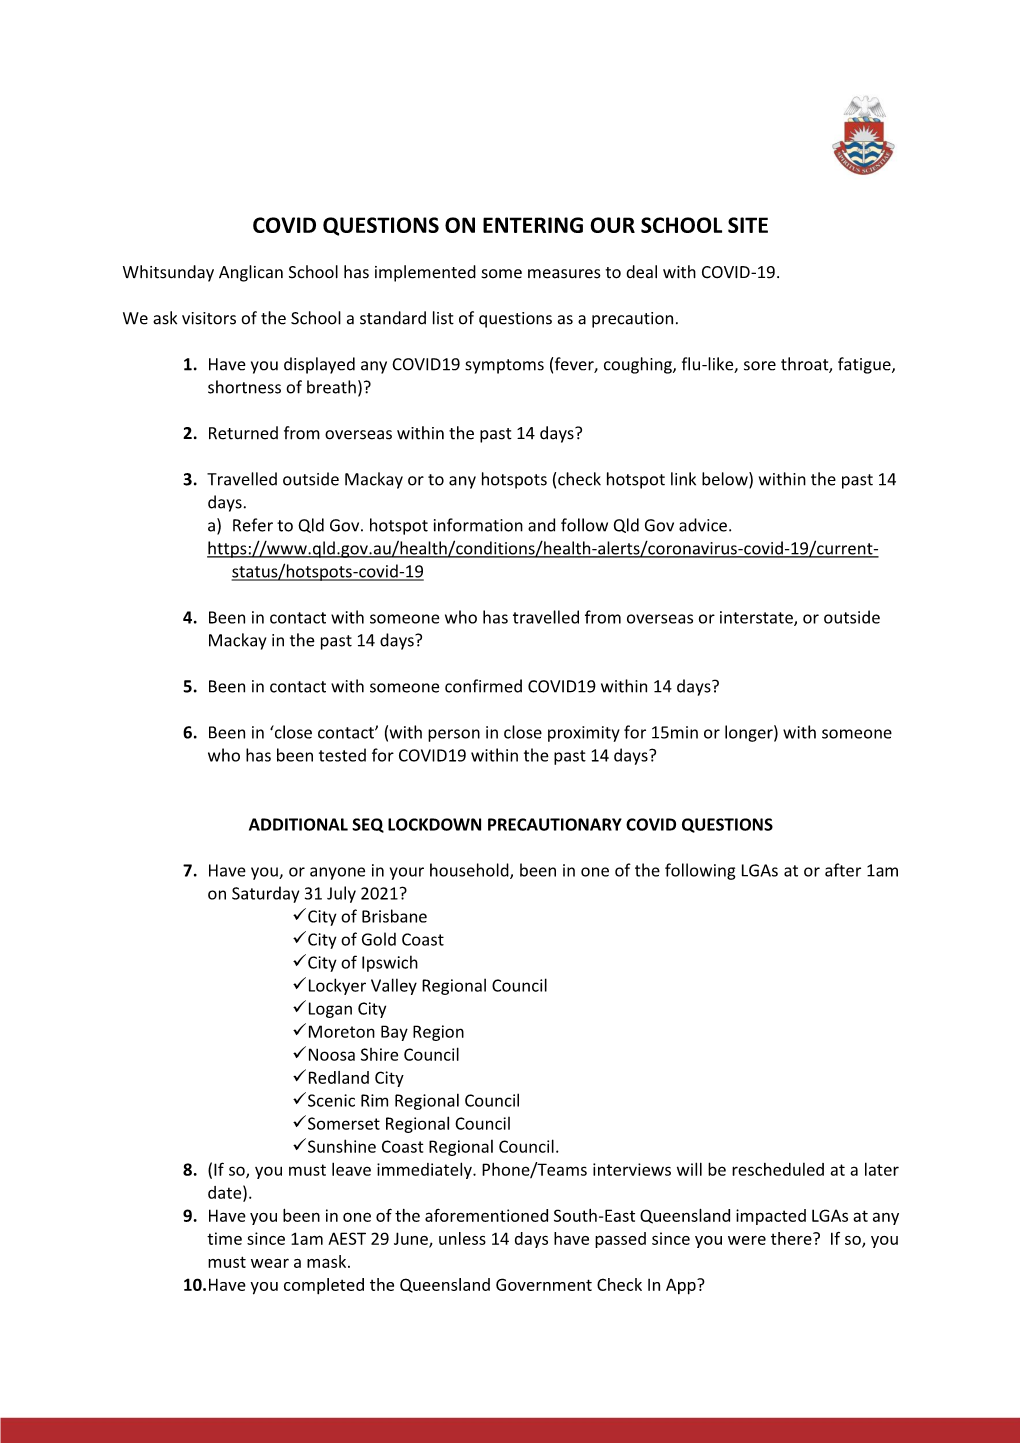 Updated COVID-19 Questions on Entering Our School Site 31 July 2021